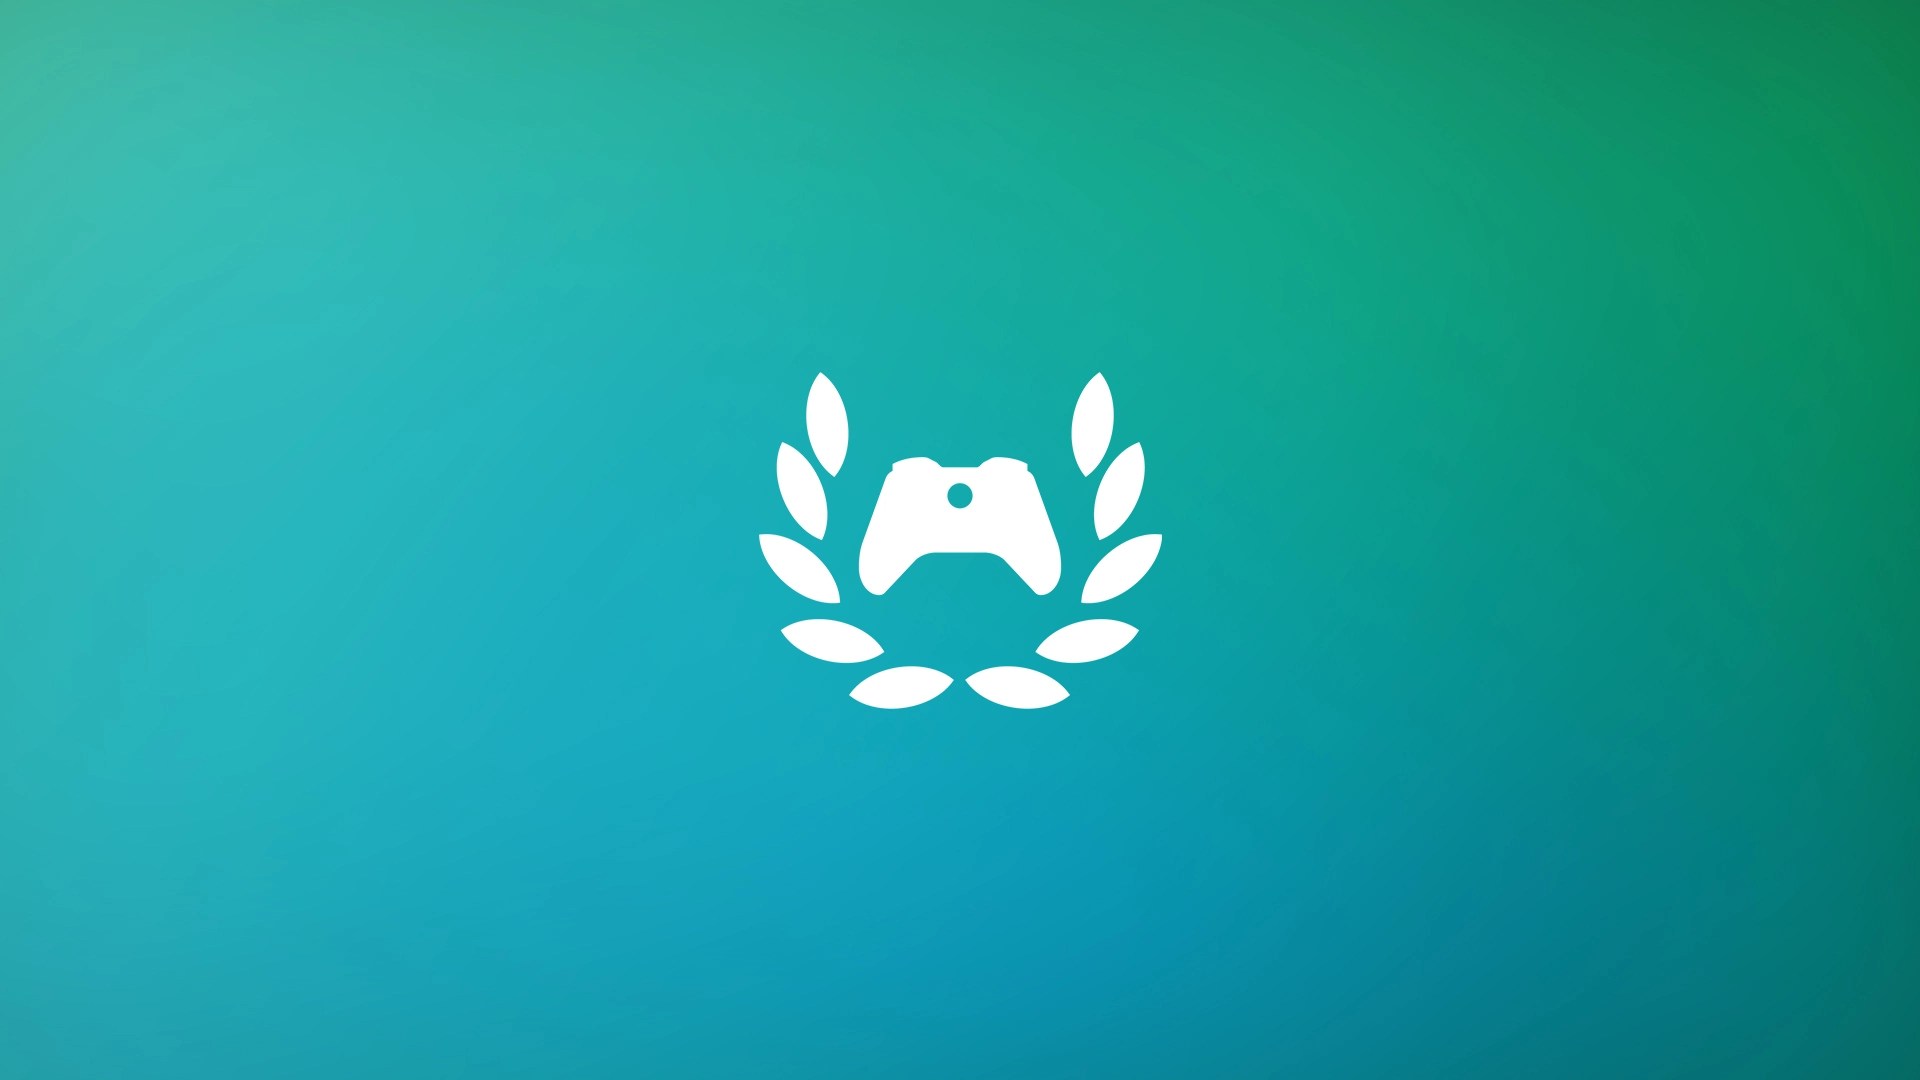 The Xbox Ambassadors logo featuring a white controller surrounded by white laurel leaves on a soft rainbow gradient background.